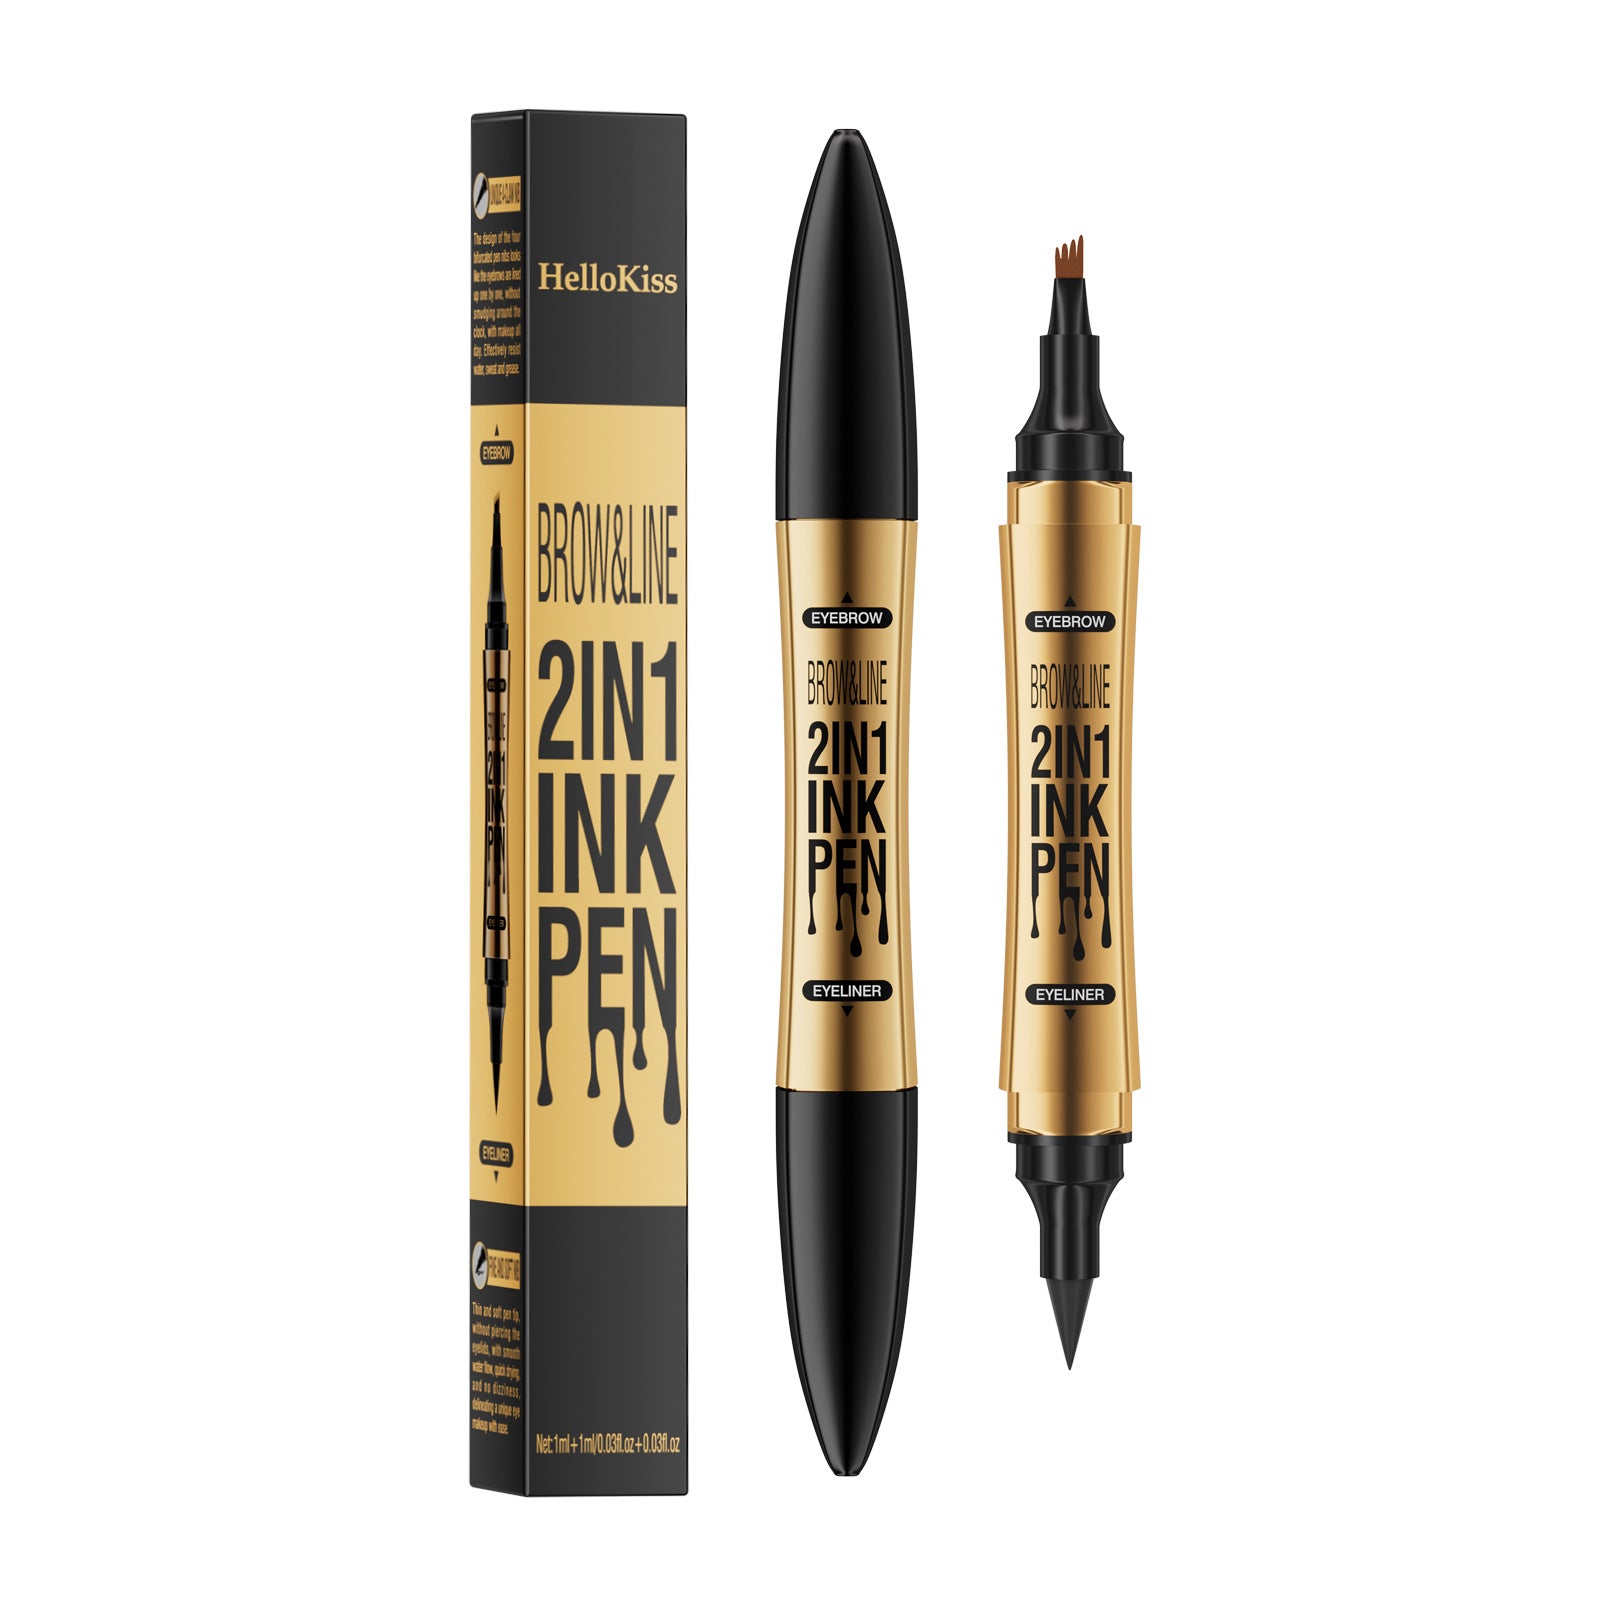 Eyeliner Eyebrow Pencil Two-in-one